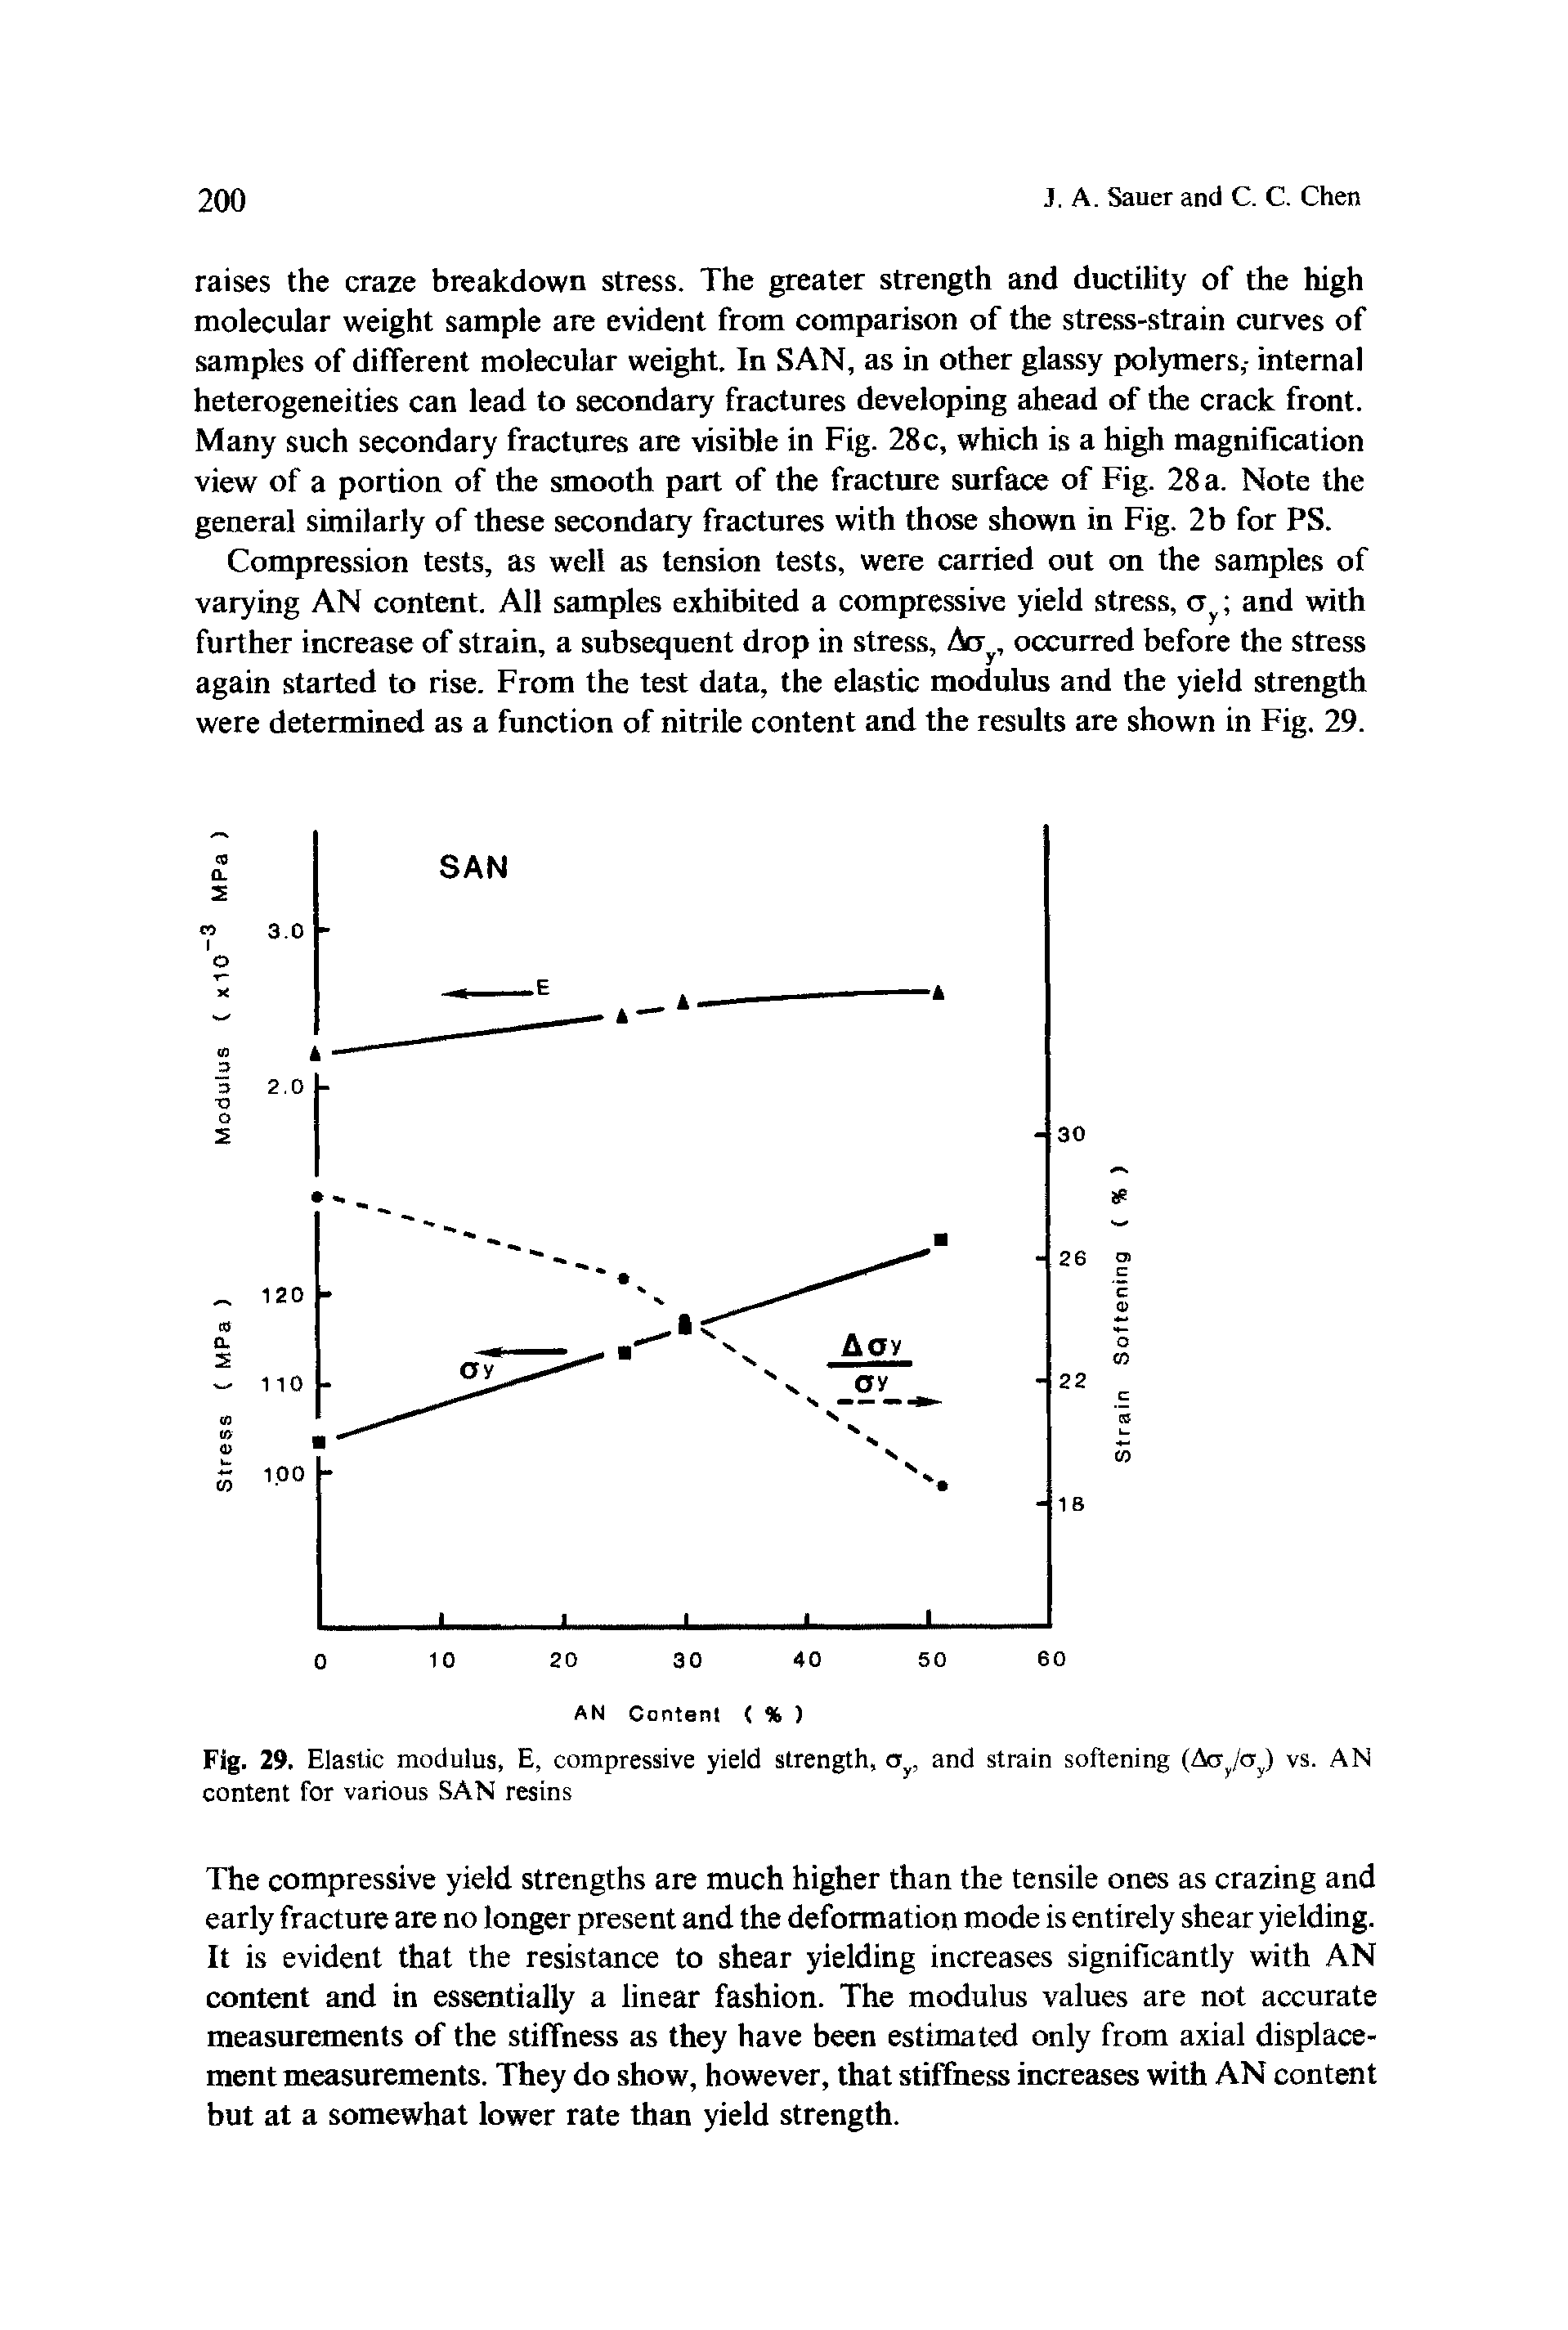 Fig. 29. Elastic modulus, E, compressive yield strength, and strain softening (Acr /o vs. AN content for various SAN resins...